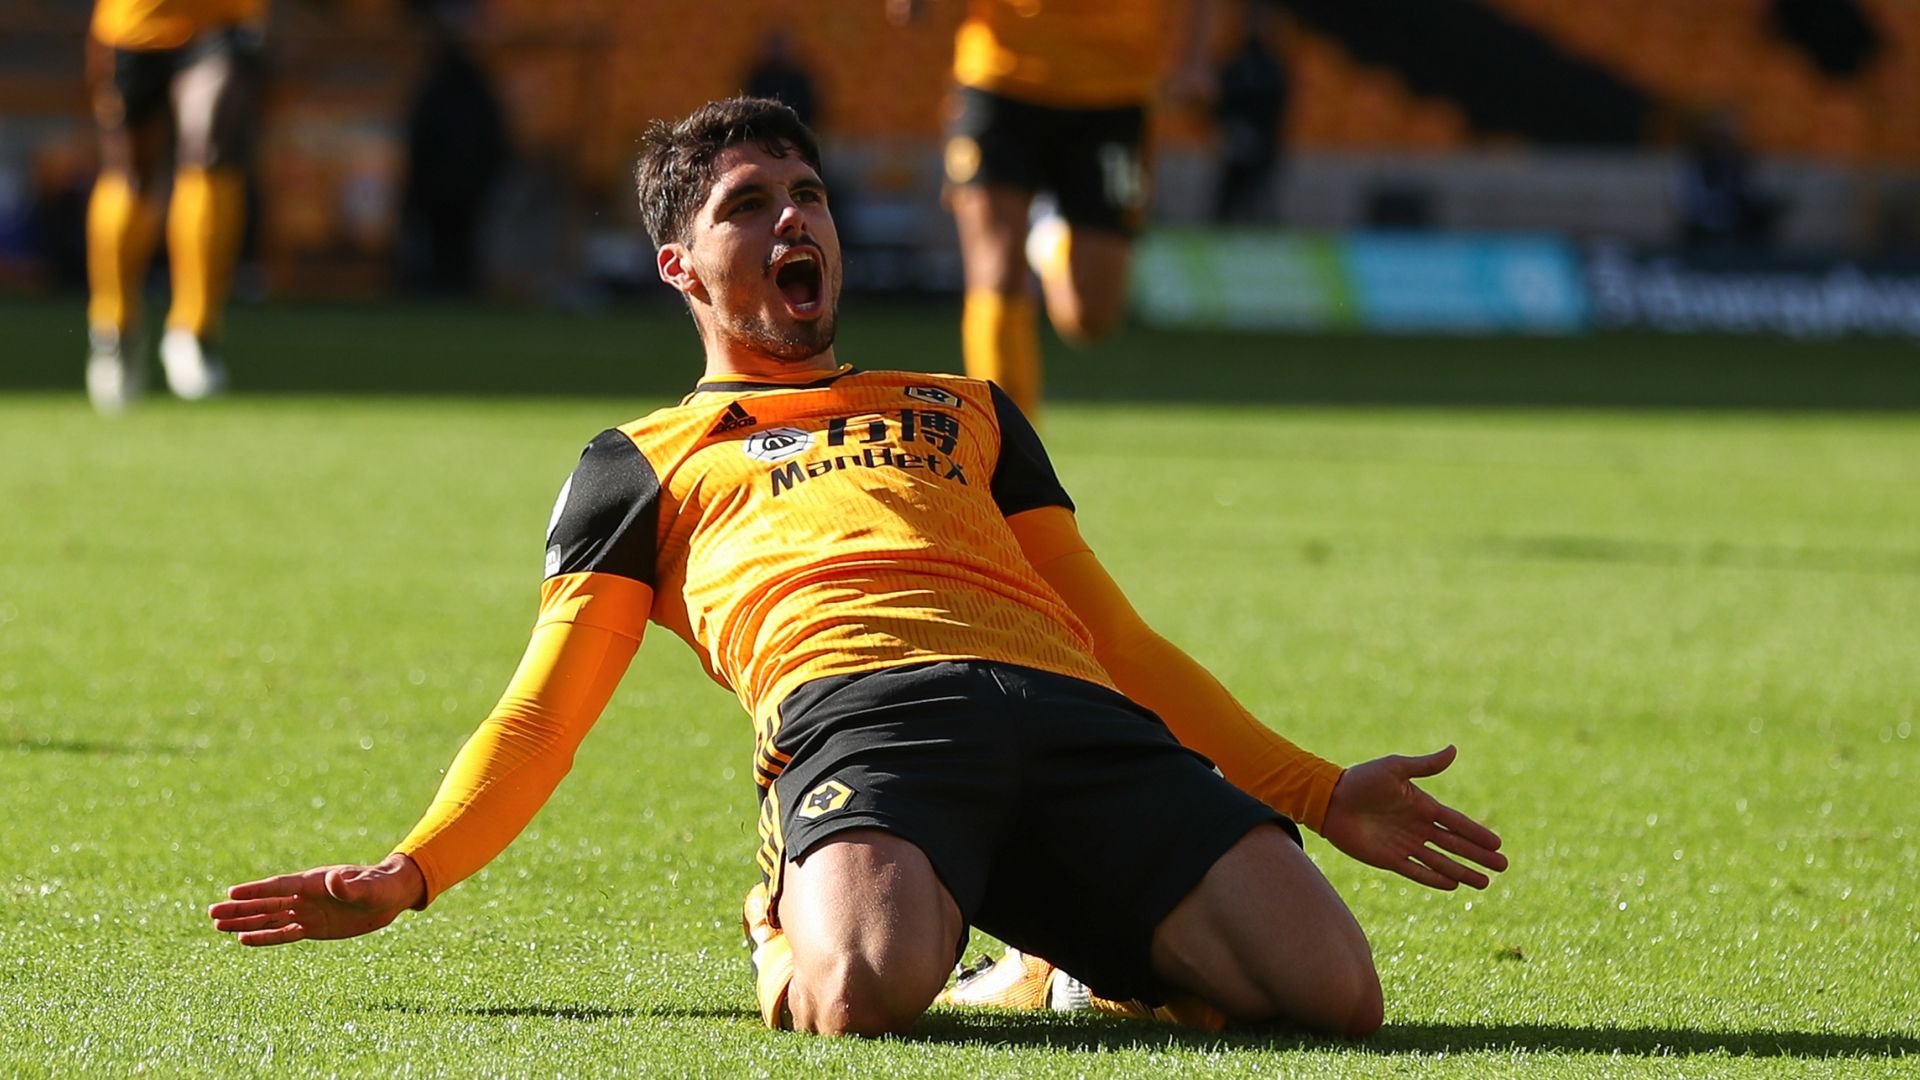 Neto strike sees Wolves edge out Fulham